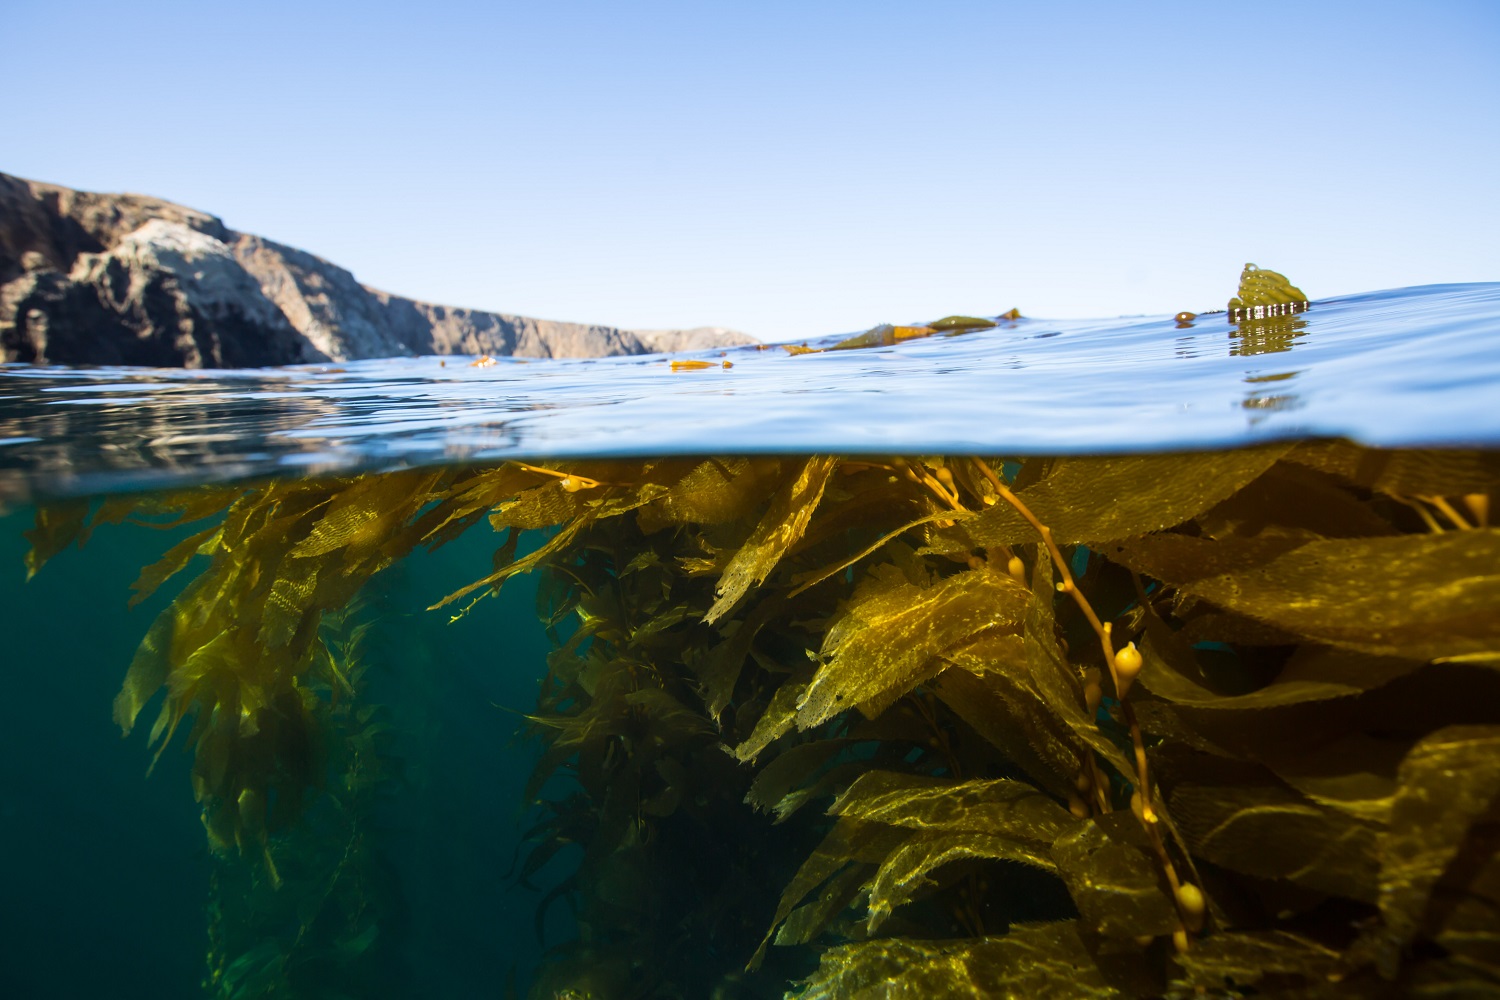 Freediving the kelp forests of California's, Channel islands.